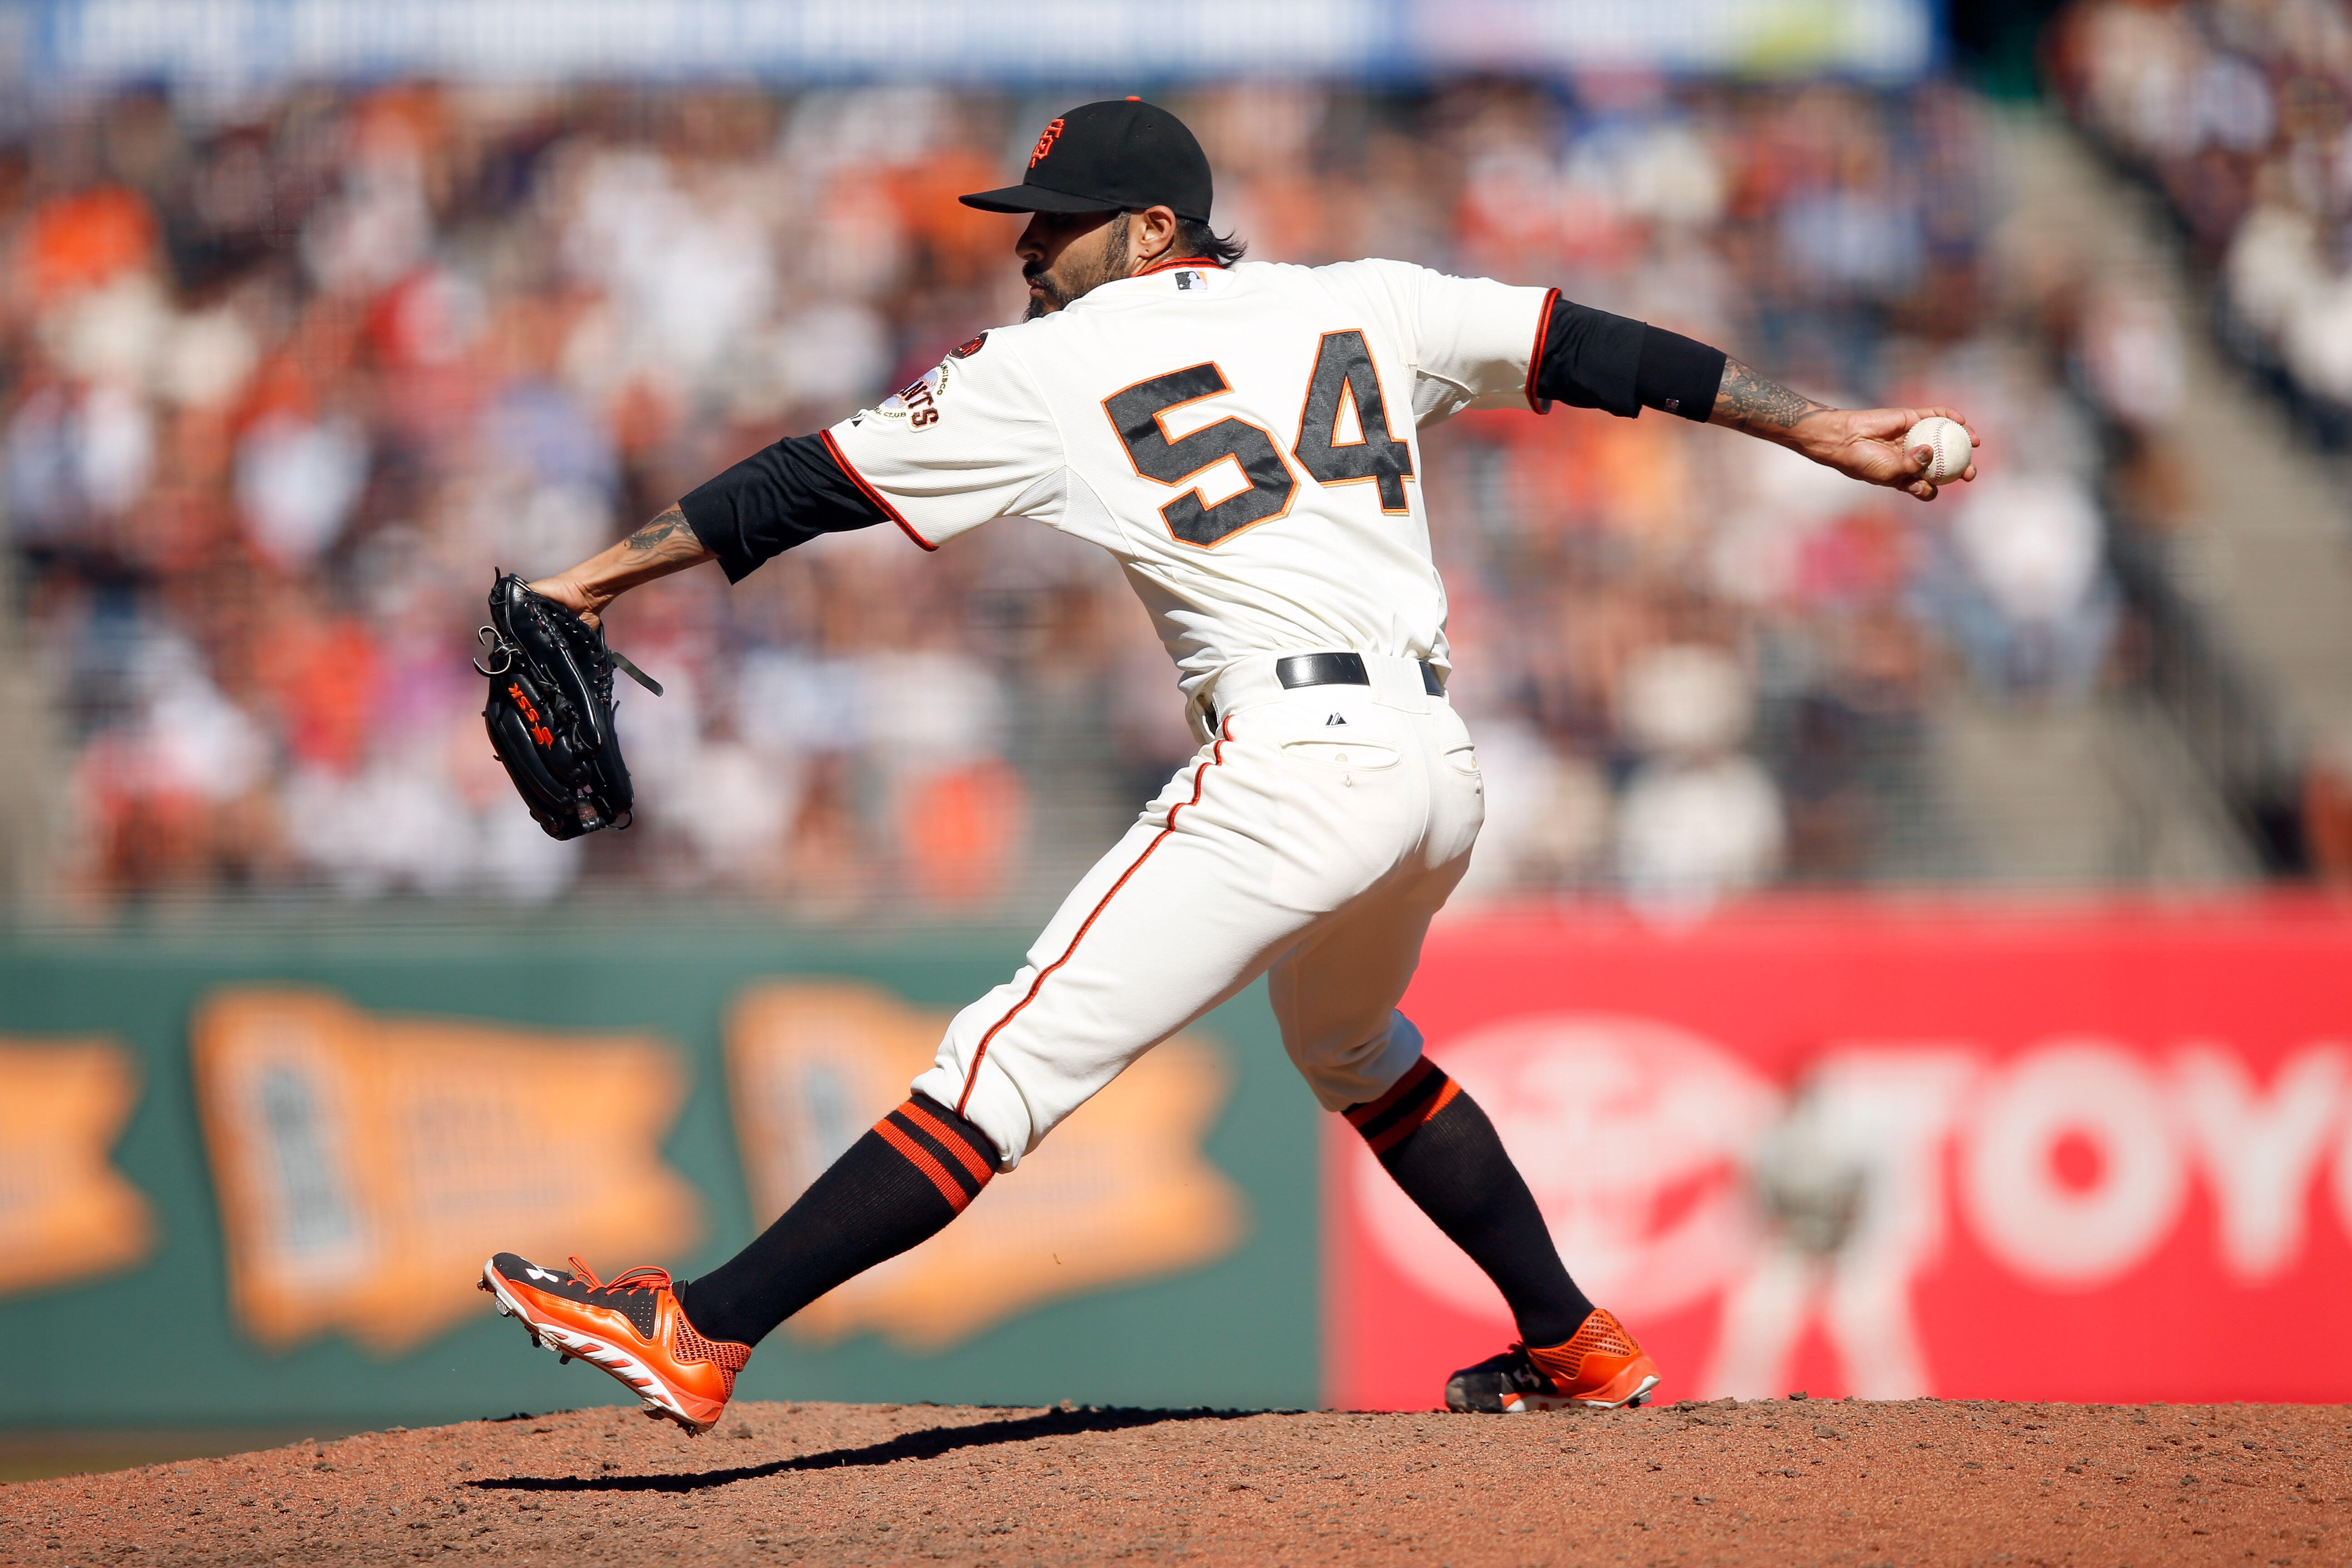 SAN FRANCISCO, CA - OCTOBER 01:  Sergio Romo #54 of the San Francisco Giants pitches against the Los Angeles Dodgers at AT&T Park on October 1, 2015 in San Francisco, California.  (Photo by Ezra Shaw/Getty Images)